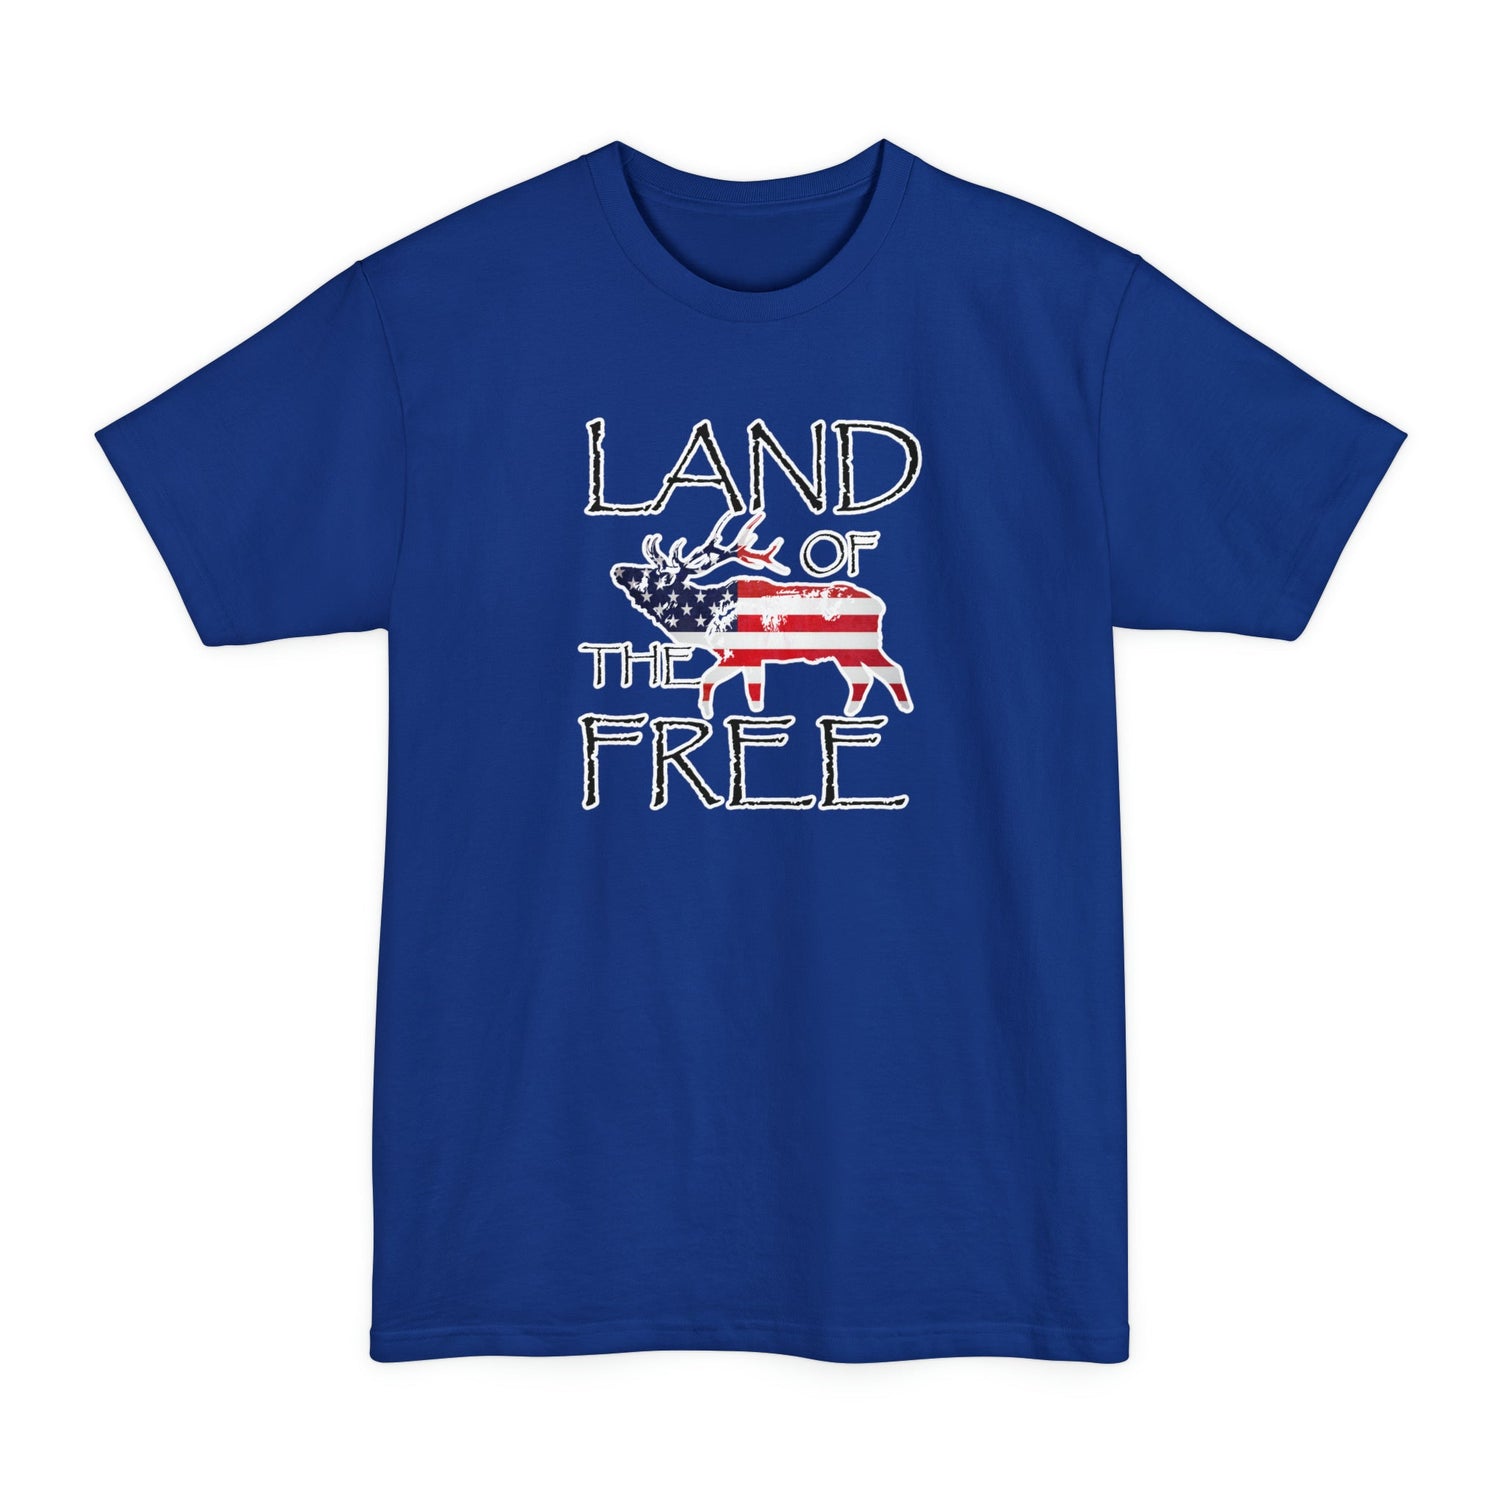 Big and tall patriotic elk hunting t-shirt, color blue, front design placement